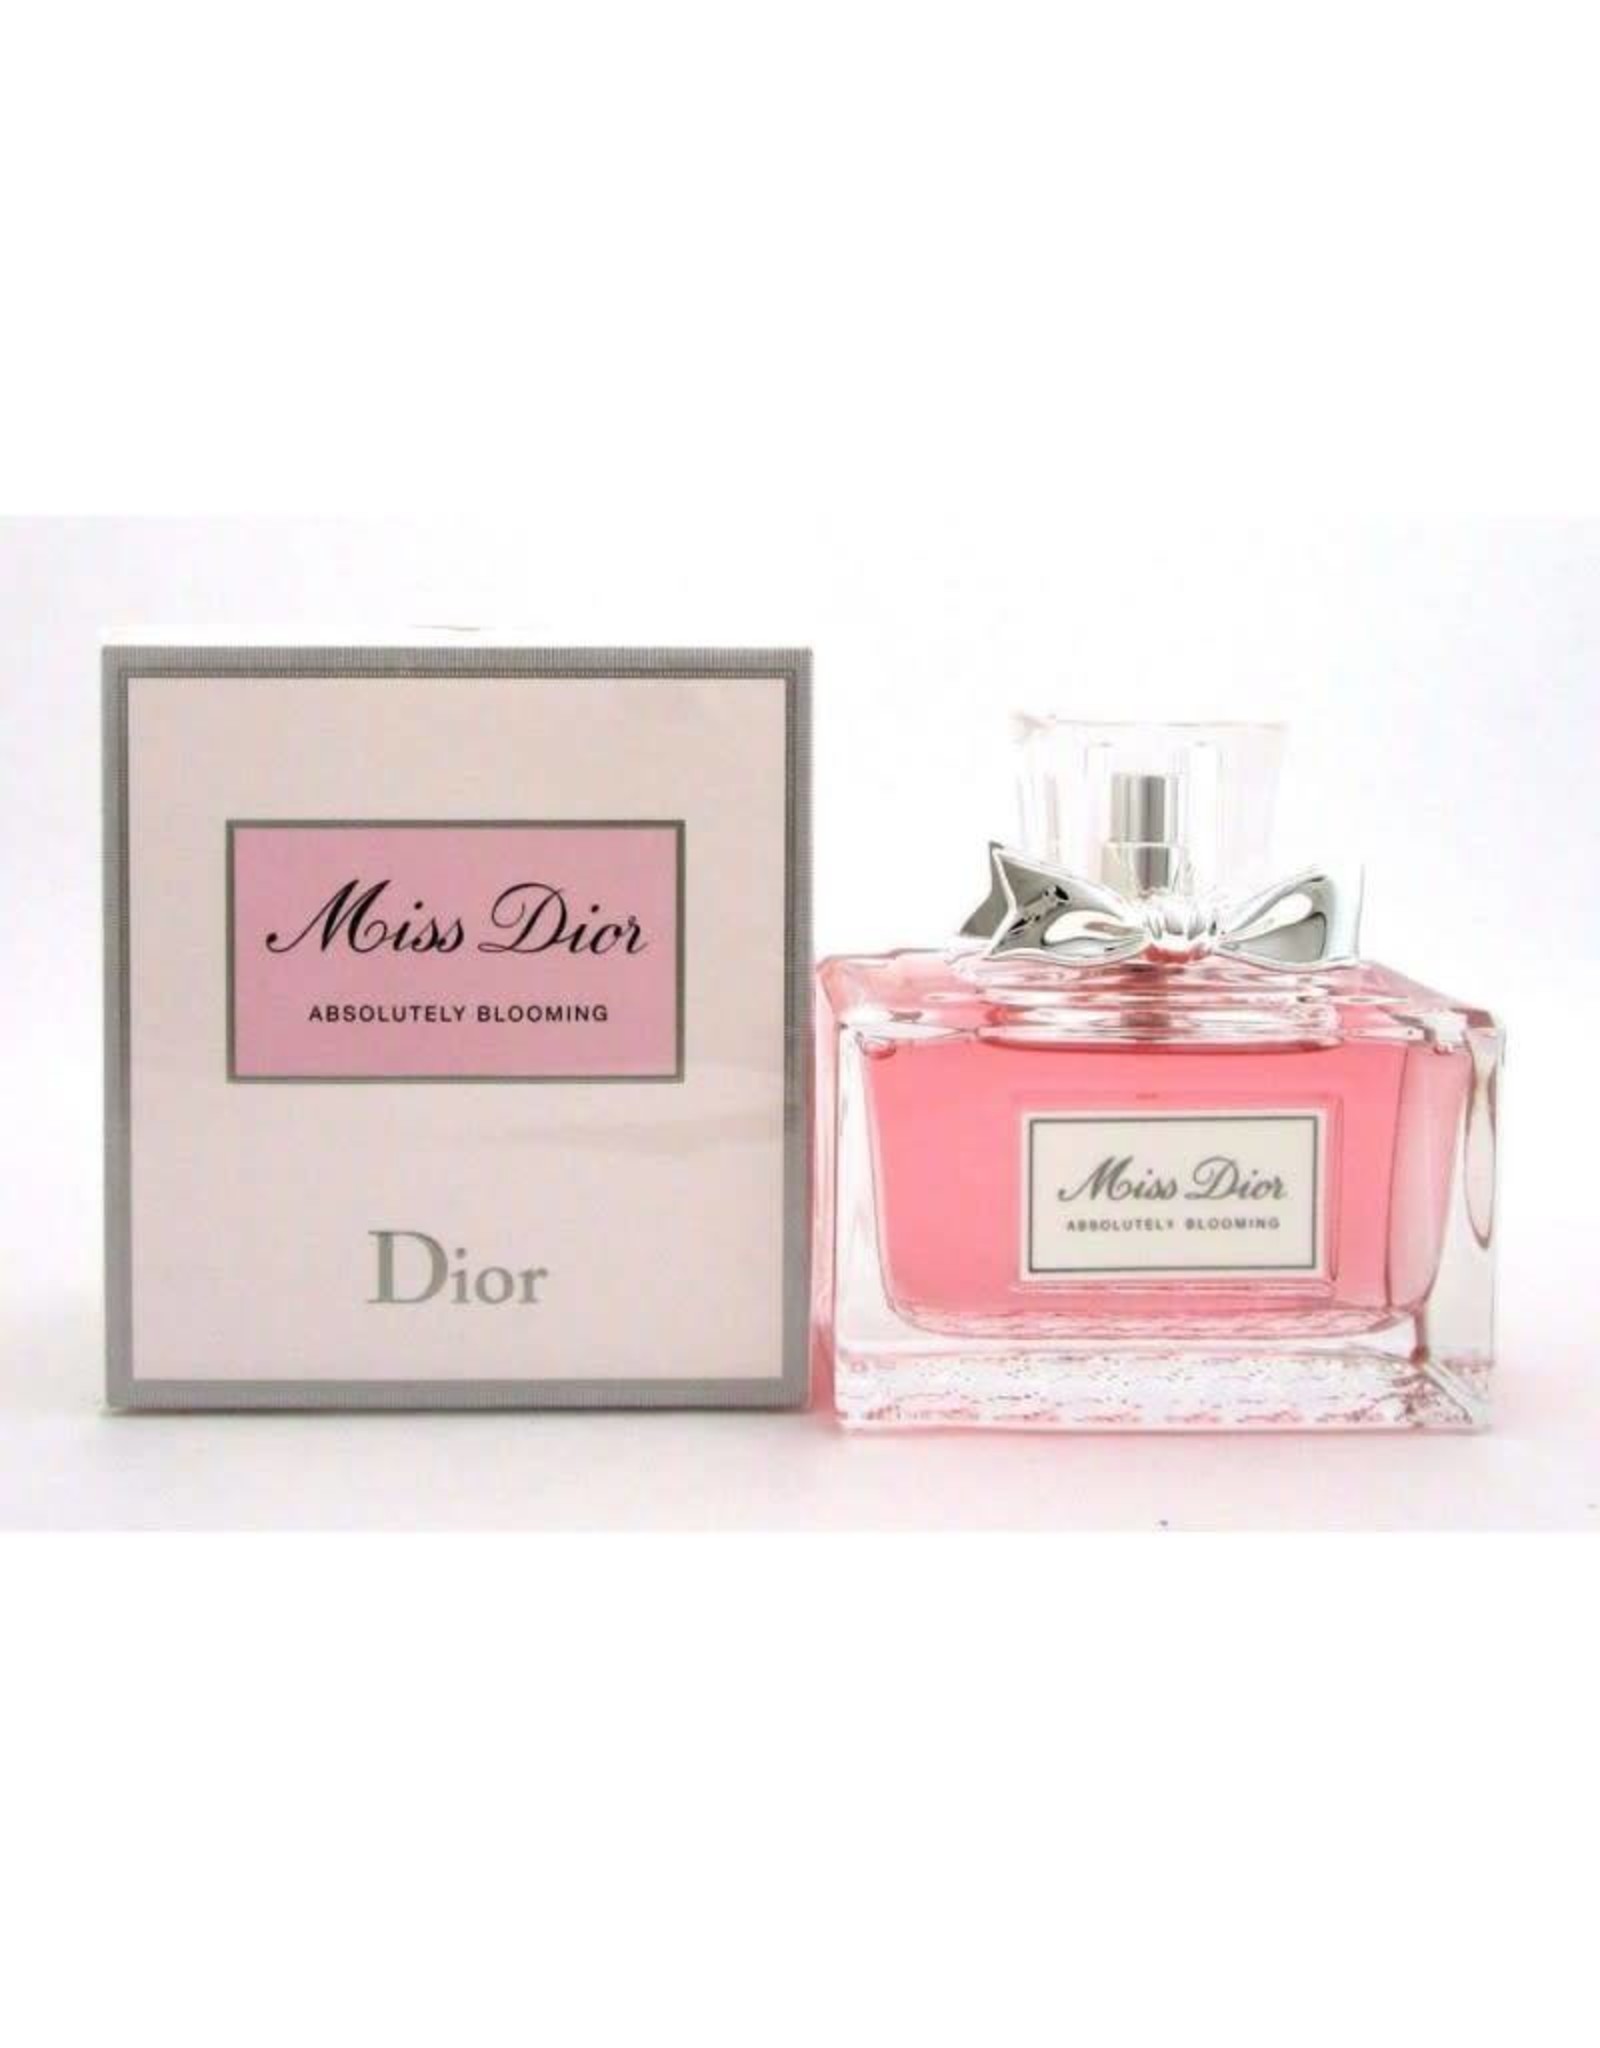 CHRISTIAN DIOR CHRISTIAN DIOR MISS DIOR ABSOLUTELY BLOOMING